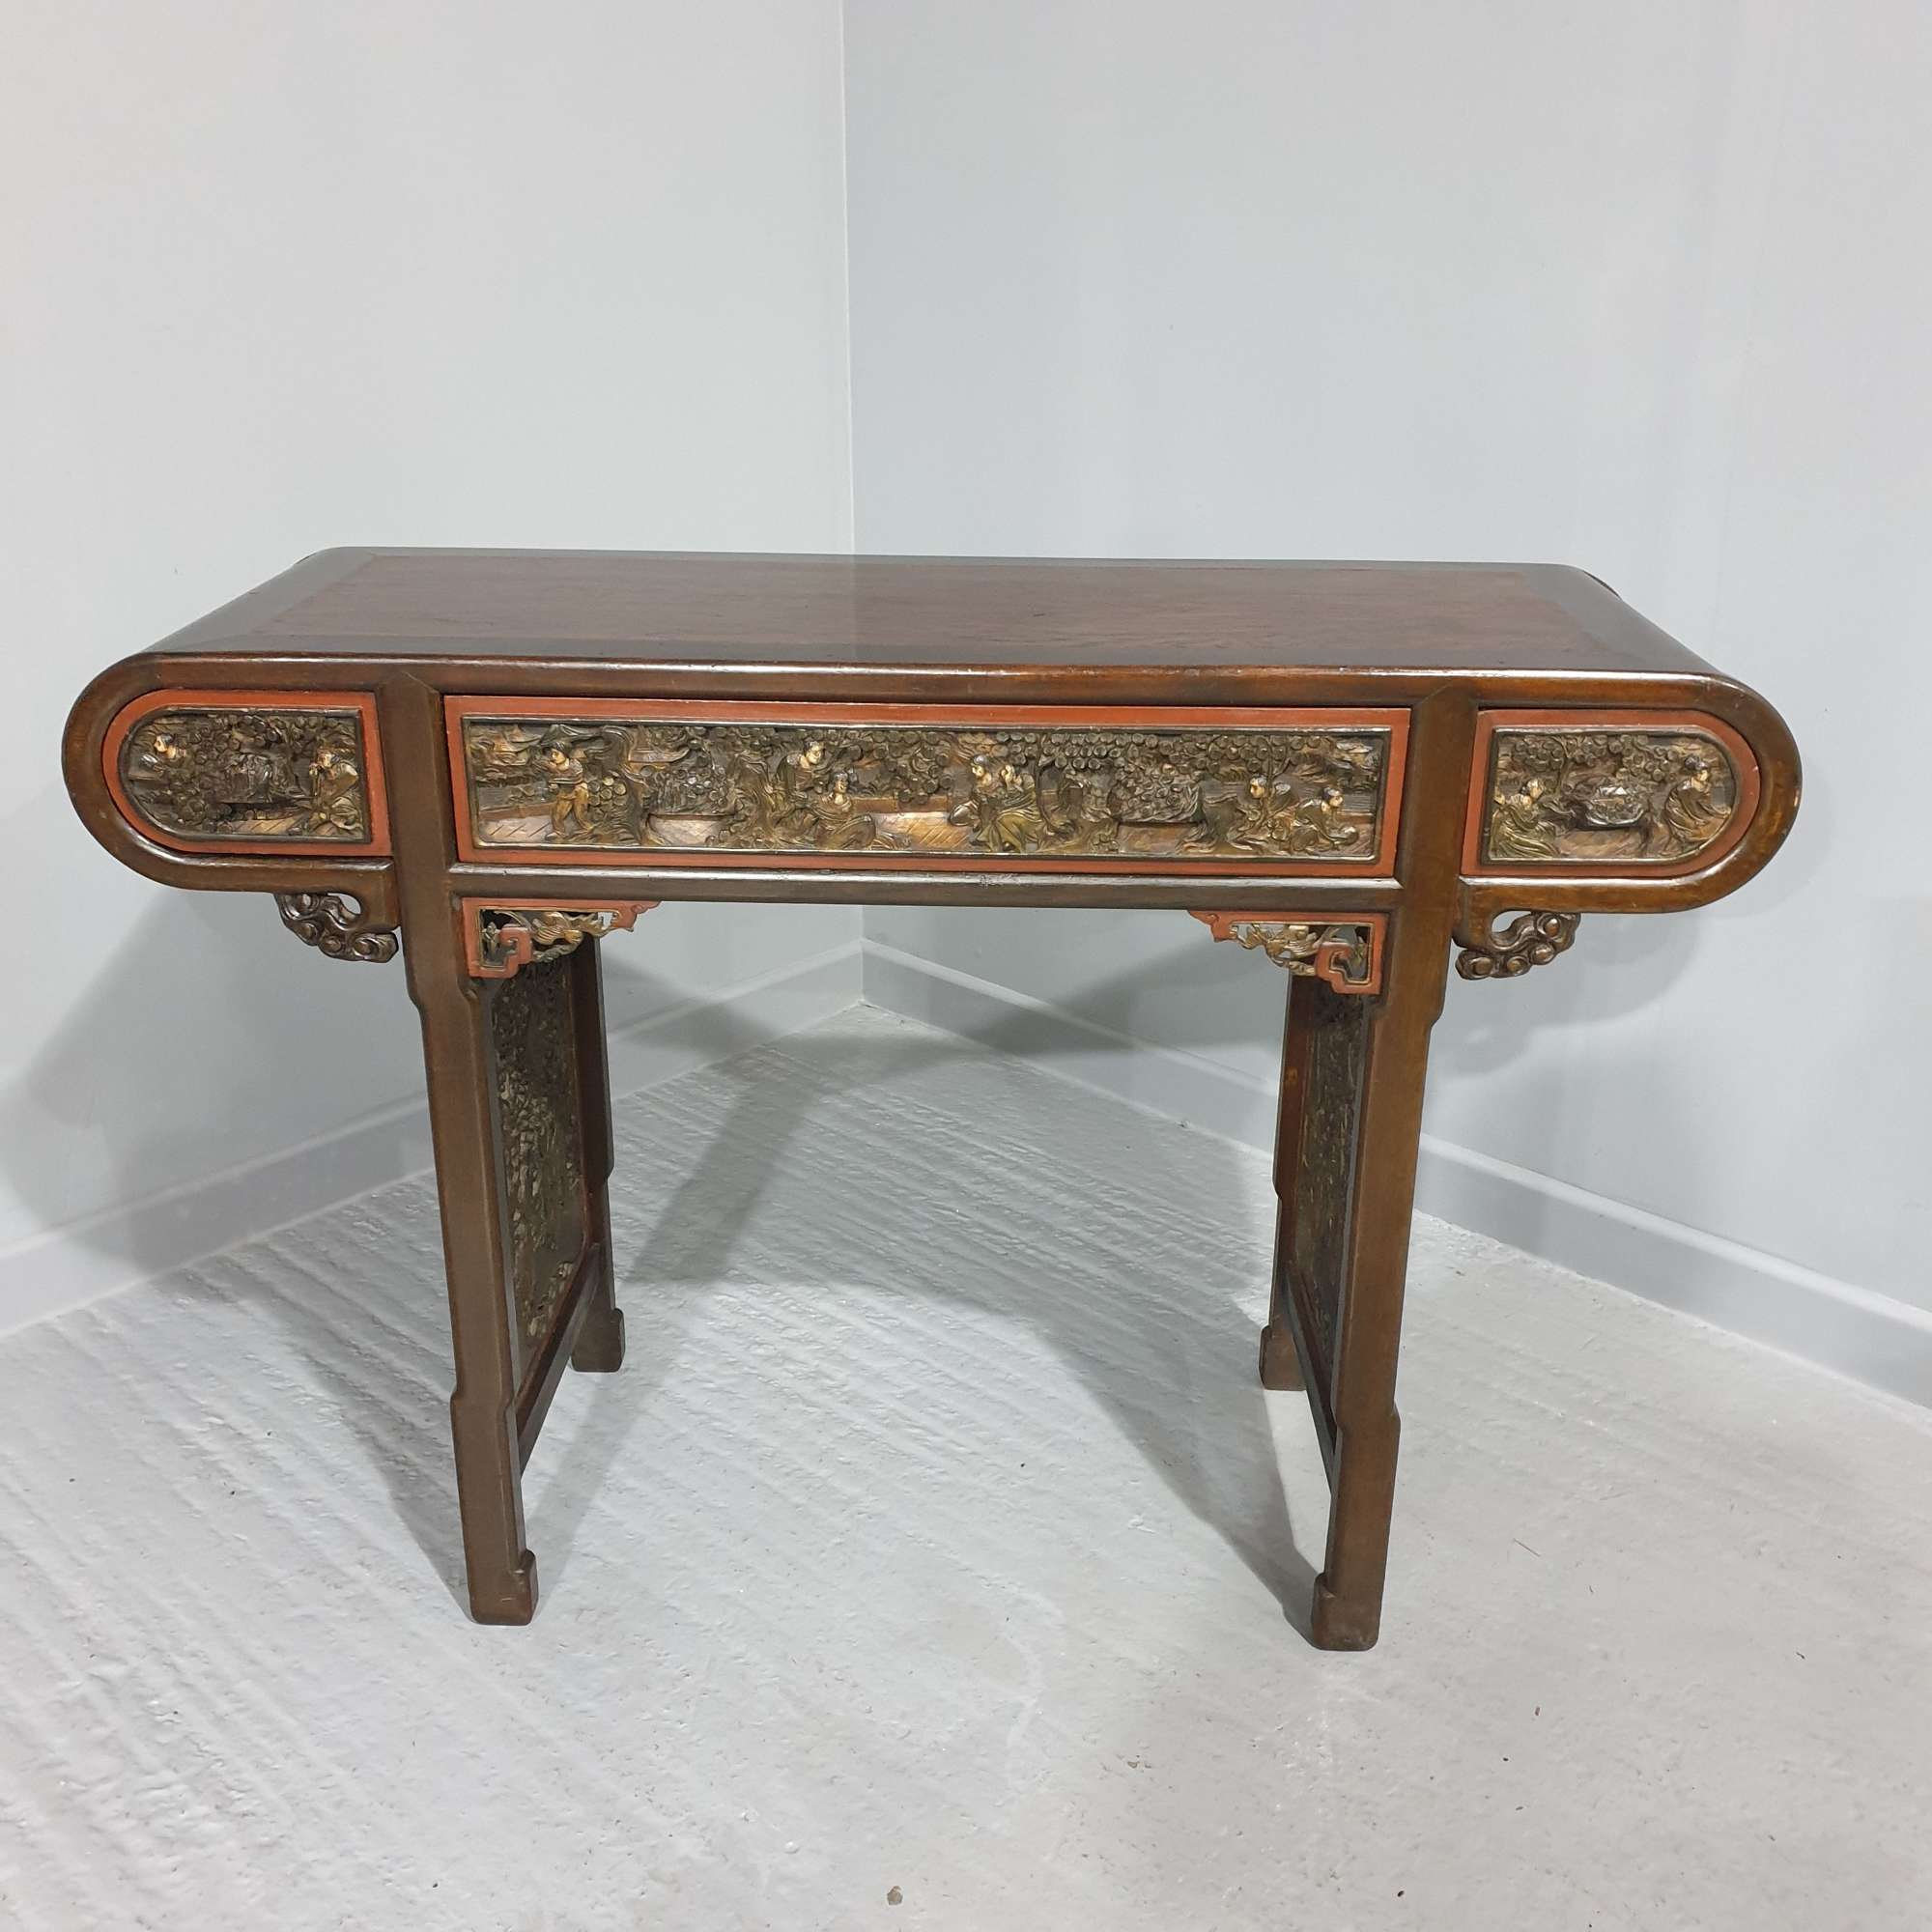 A Superb Oriental Carved Alter Or Antique Console Table